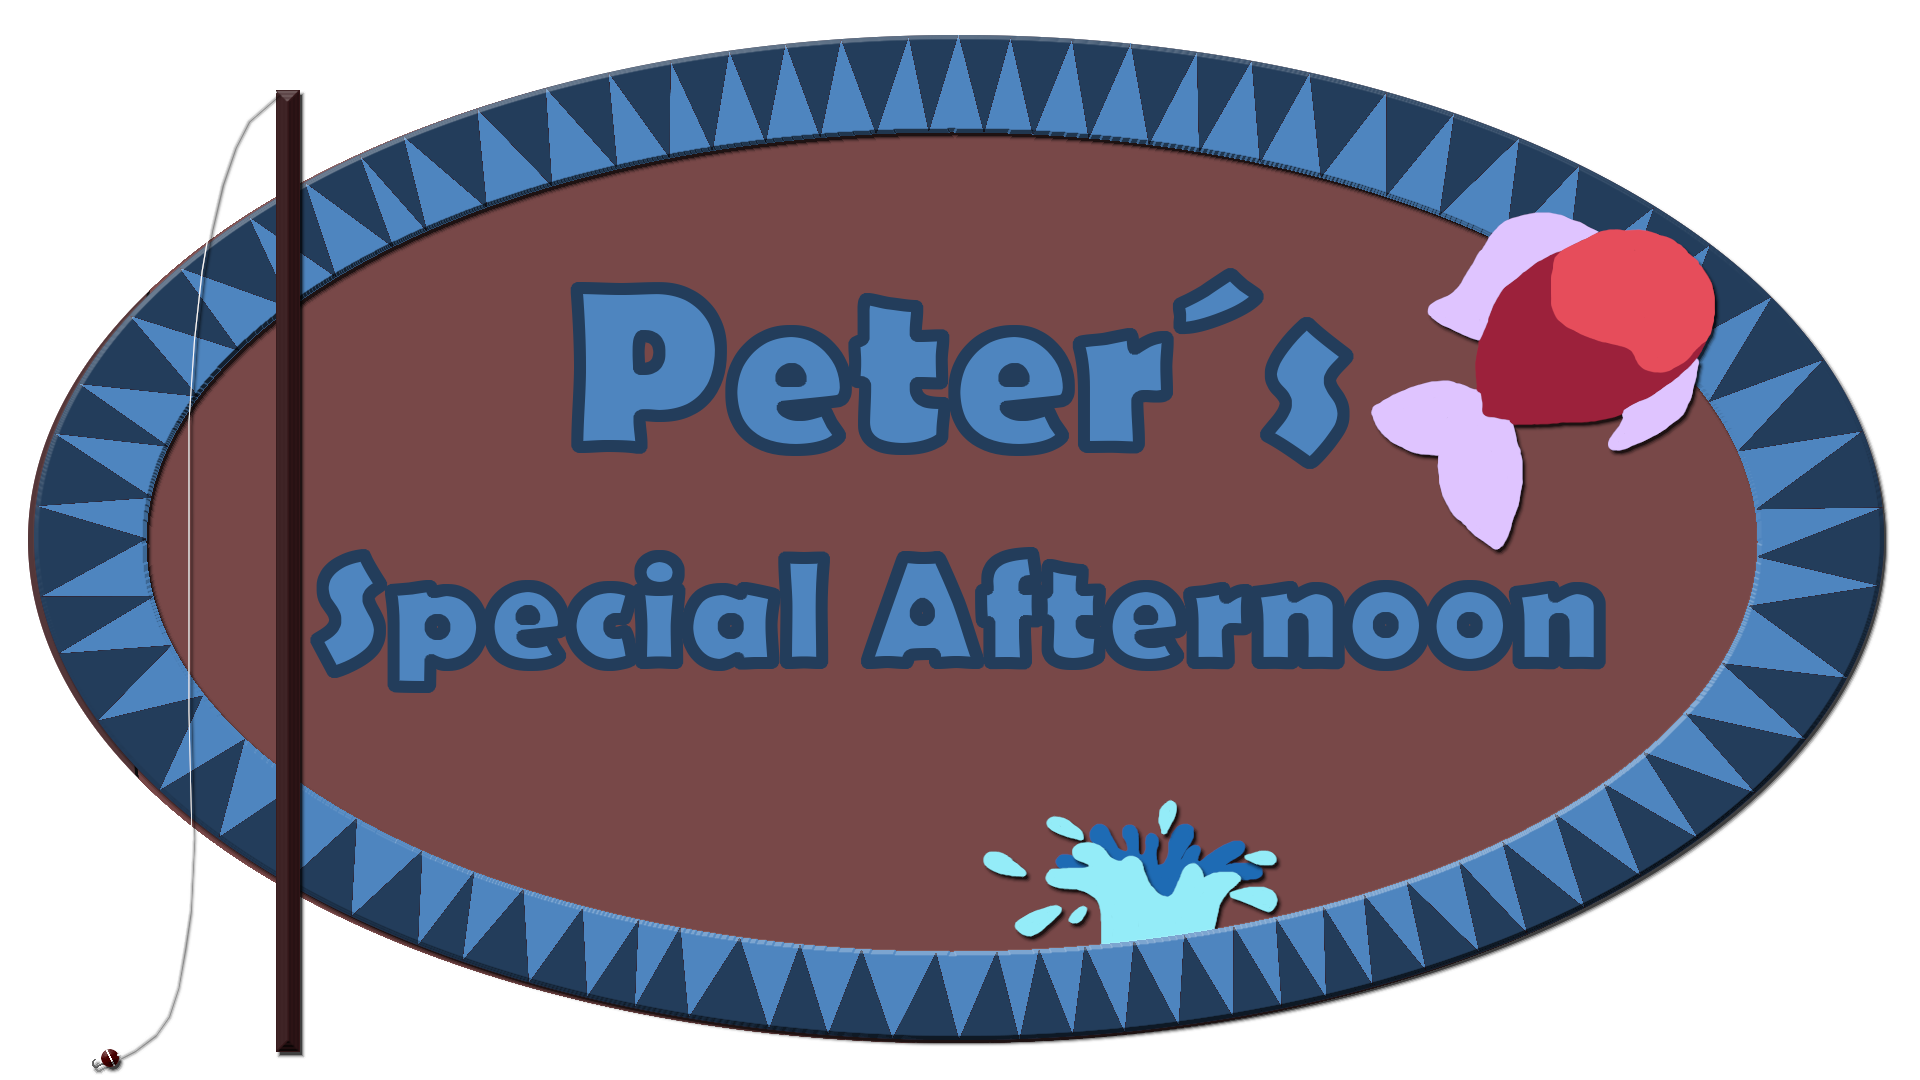 Peter's Special Afternoon